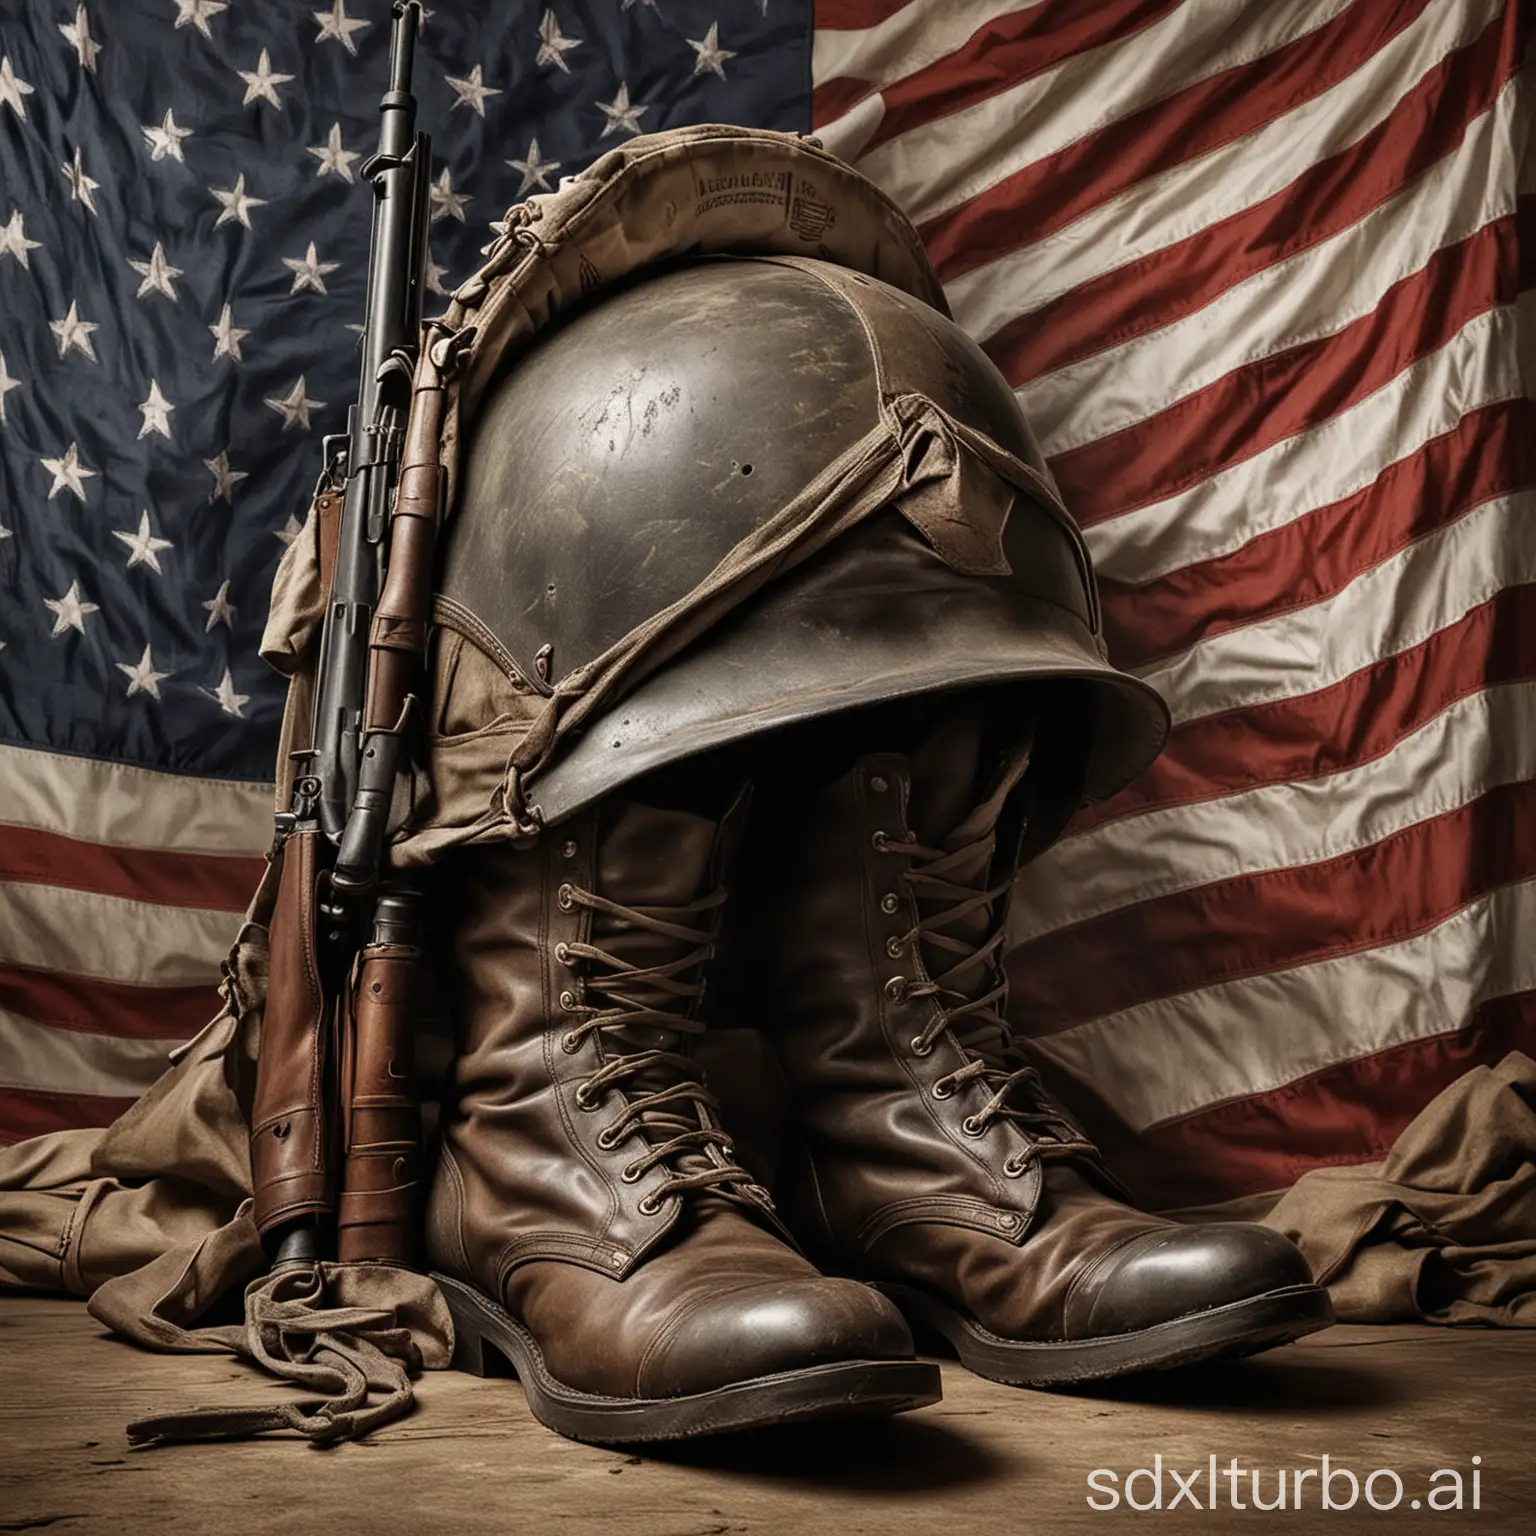 An illustration depicting a soldier's helmet, rifle, and boots arranged in a solemn tribute, with the American flag draped over them in a somber setting.